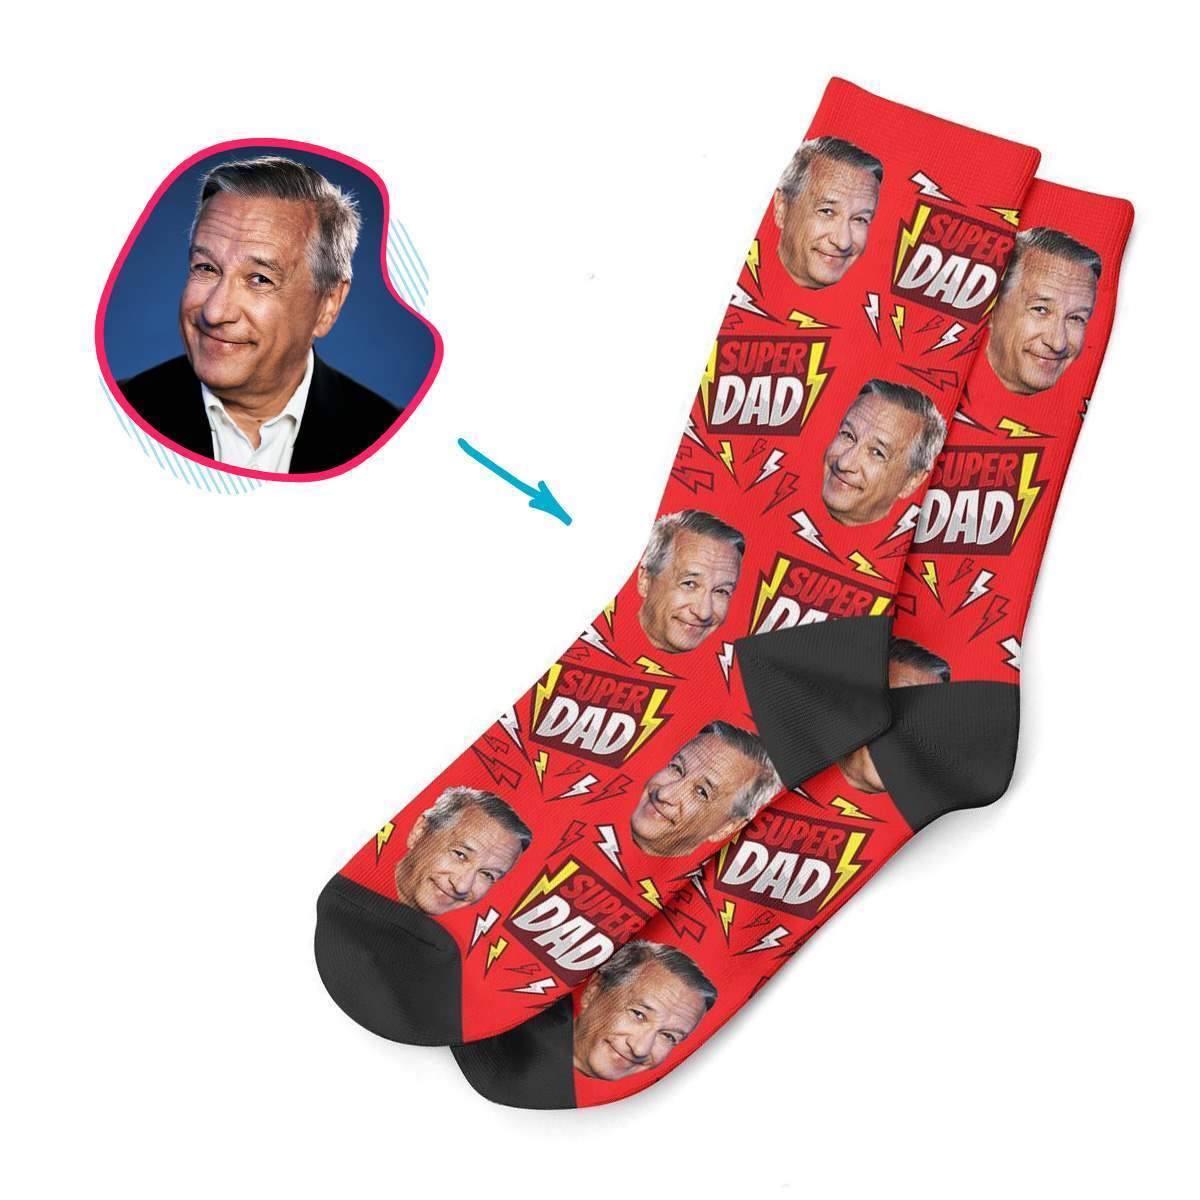 red Super Dad socks personalized with photo of face printed on them